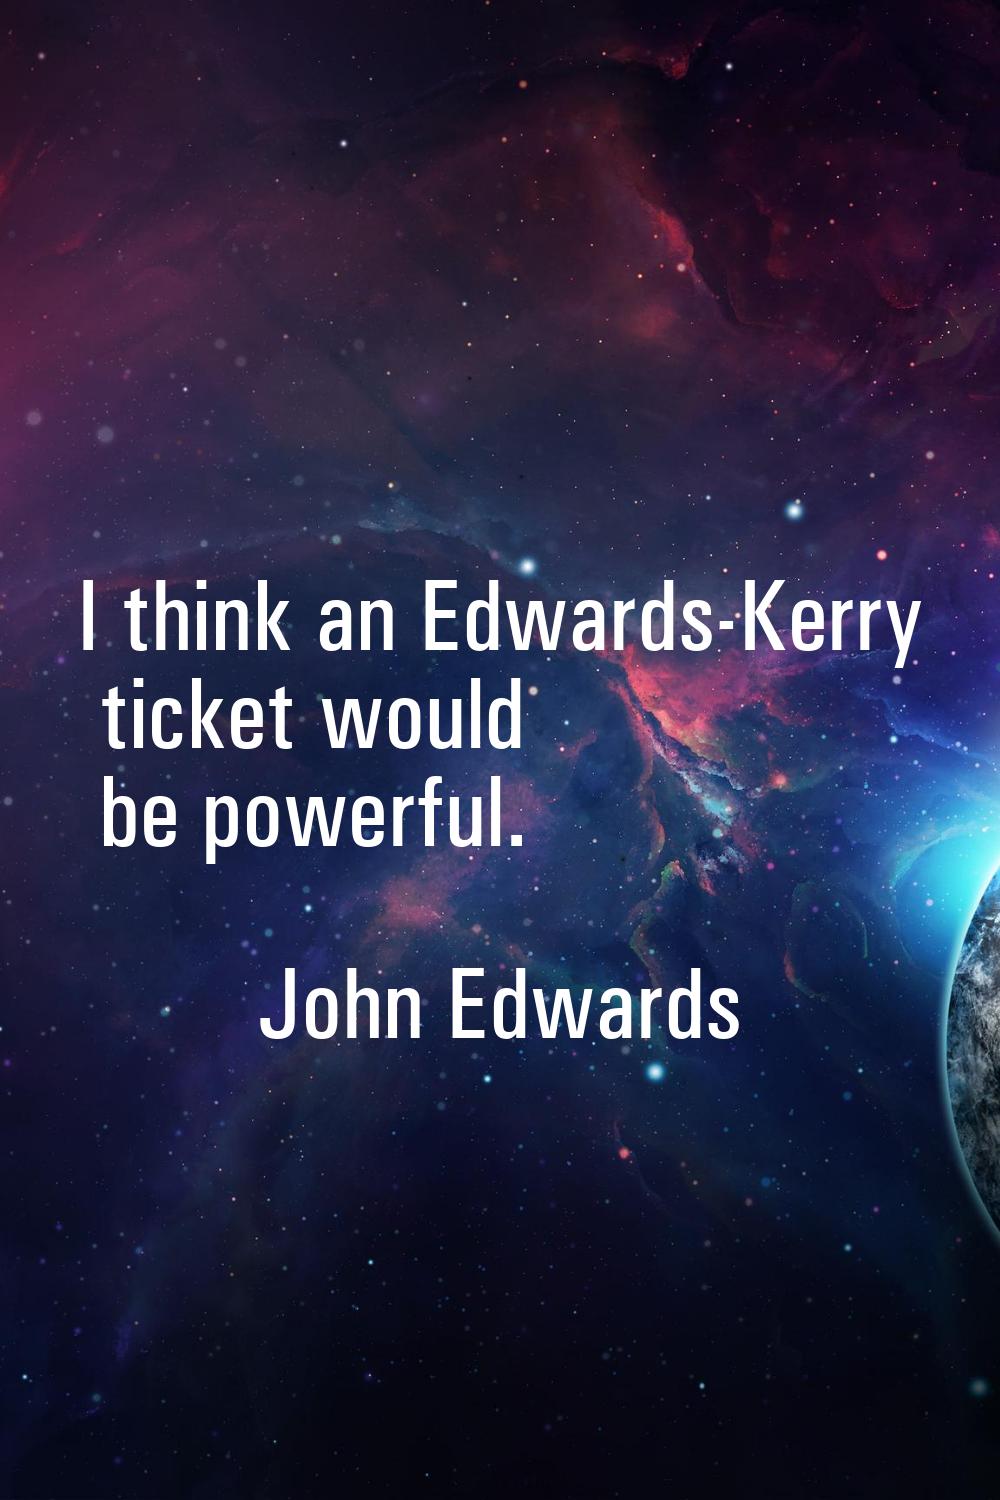 I think an Edwards-Kerry ticket would be powerful.